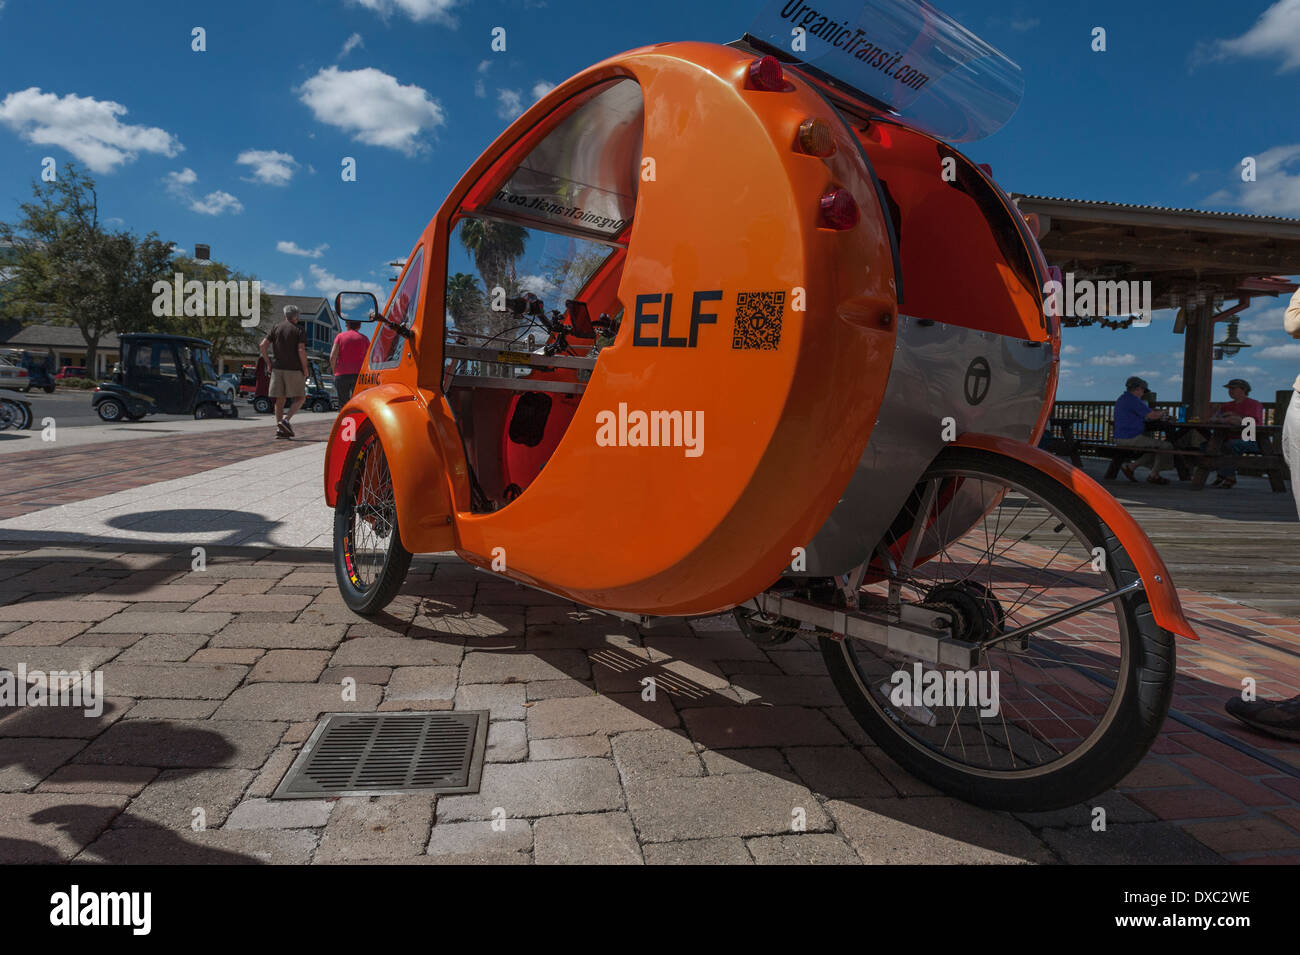 ELF is a sun-powered trike. You can pedal it or use the electric assist! Get power through the solar panels or simply charge it. Stock Photo